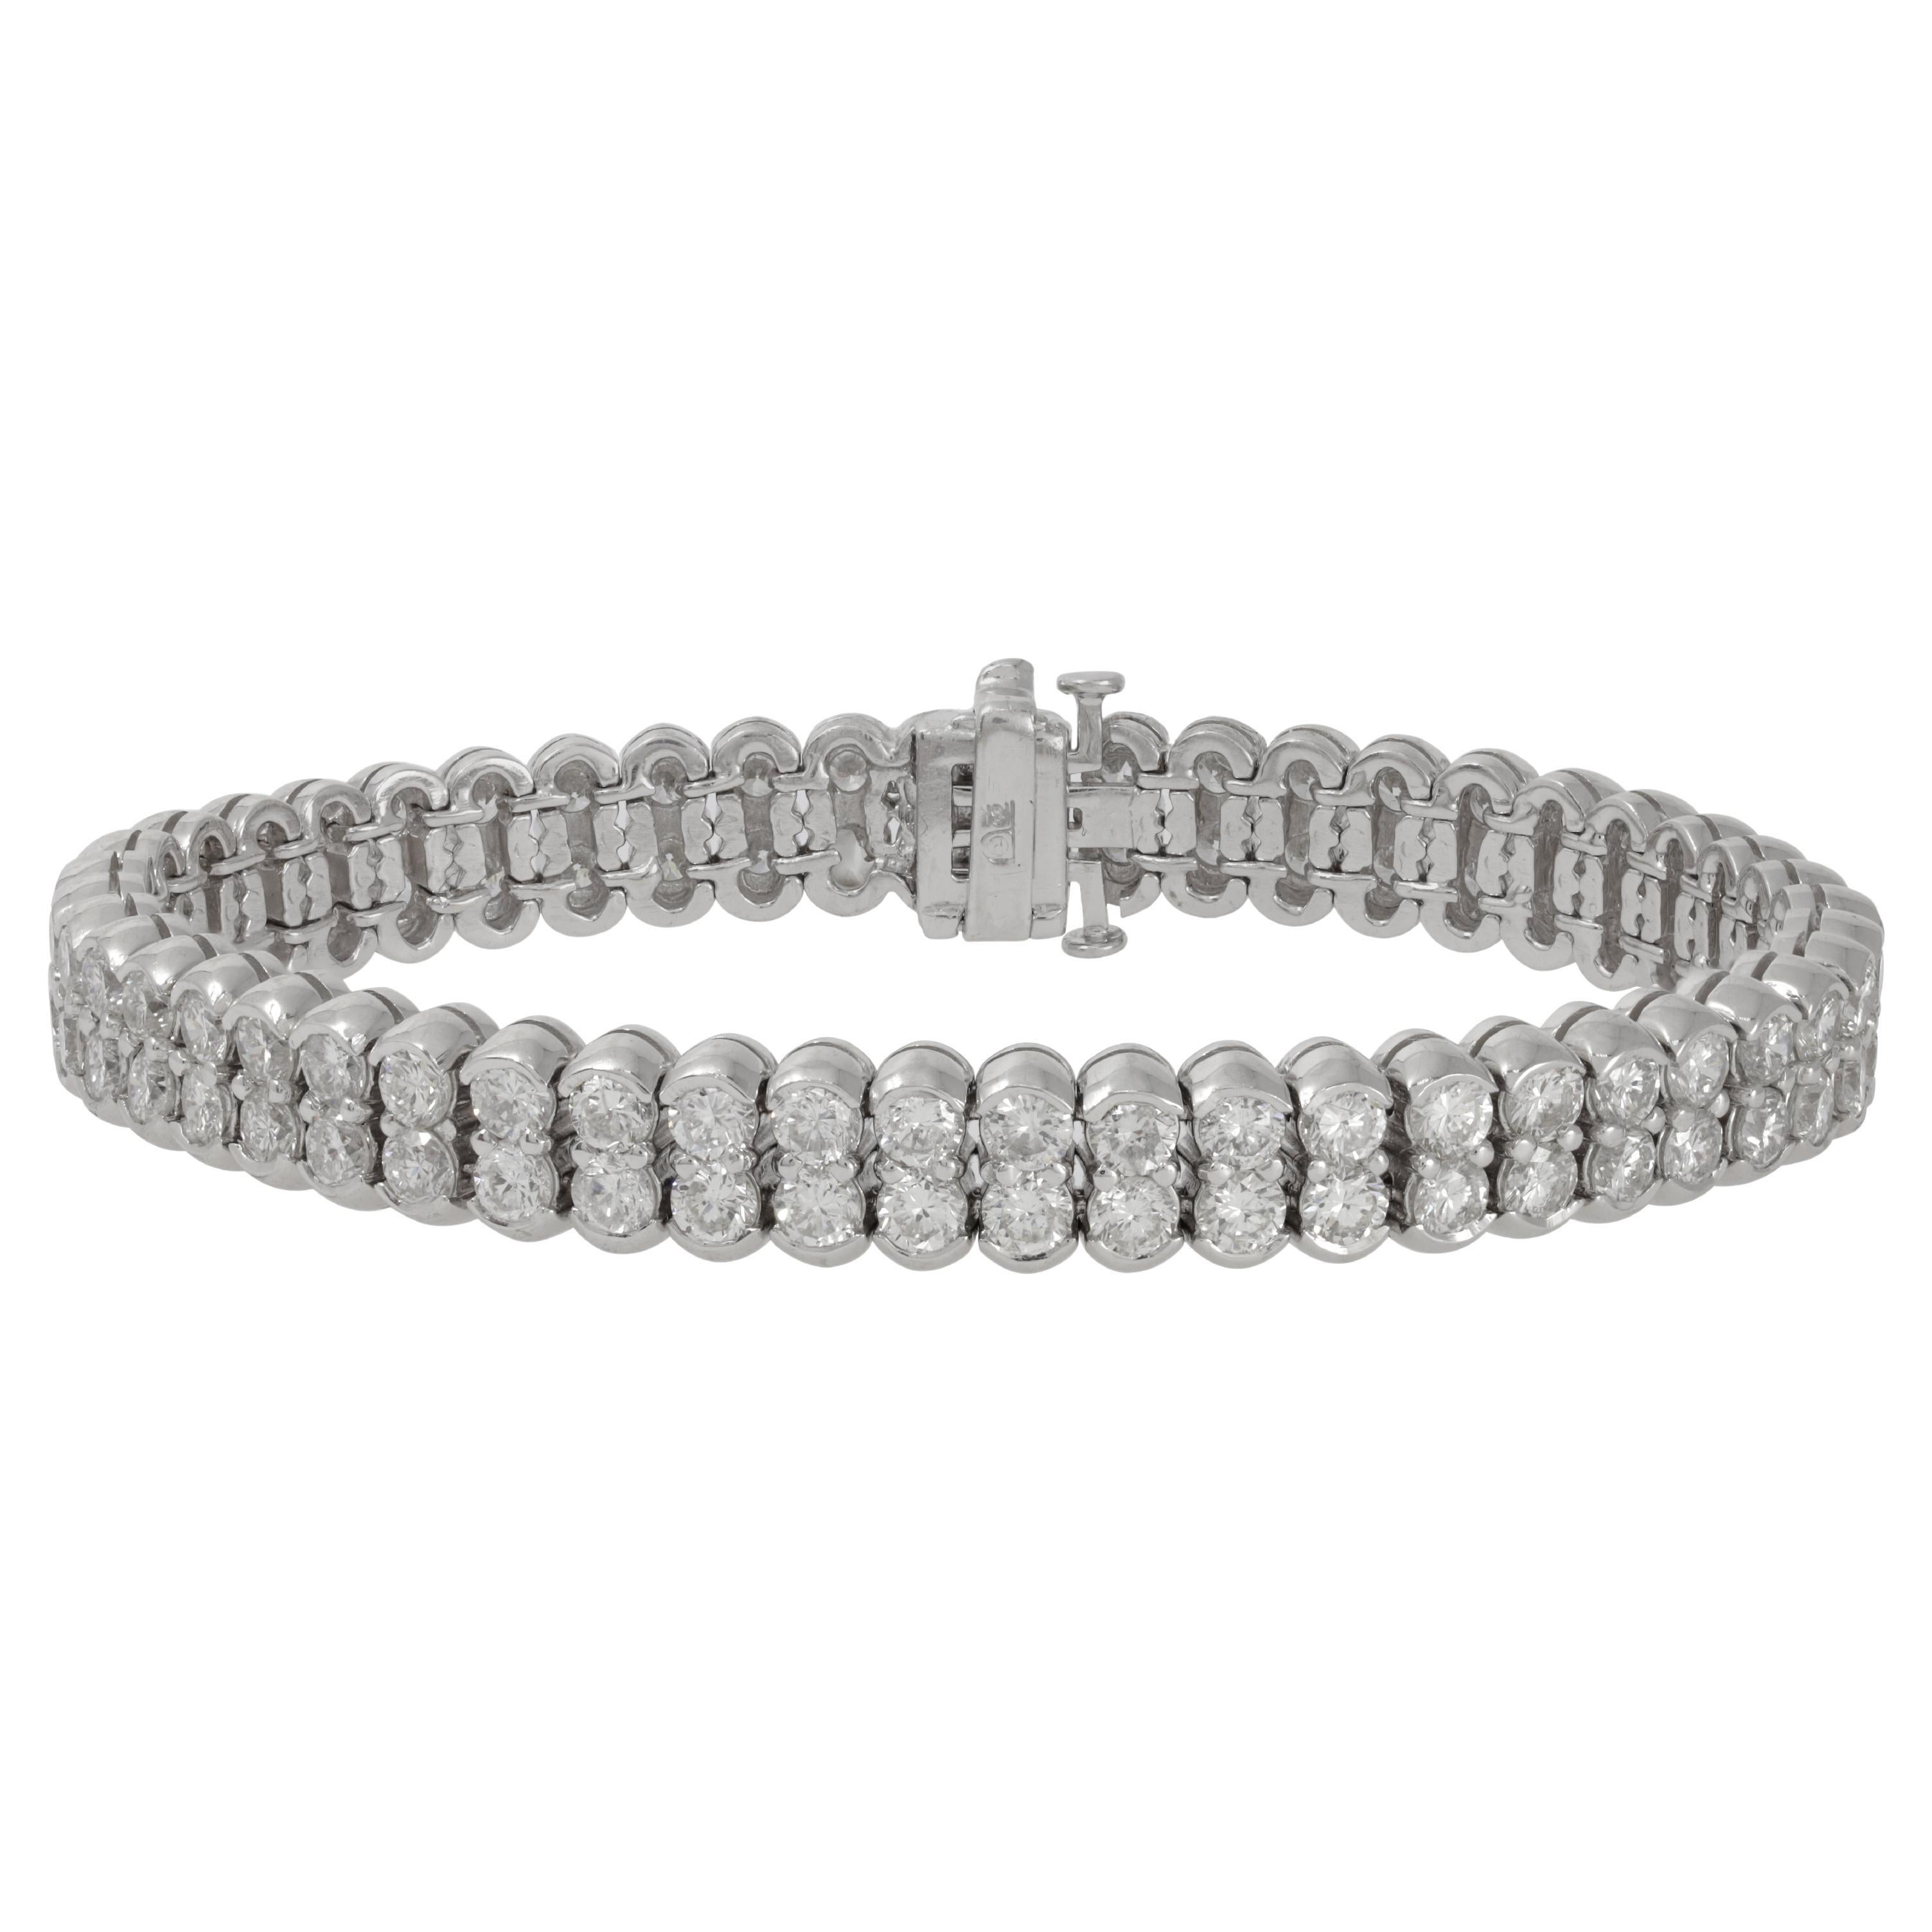 DIANA M. 18kt white gold bracelet featuring 2 rows of 11.70 cts round diamonds